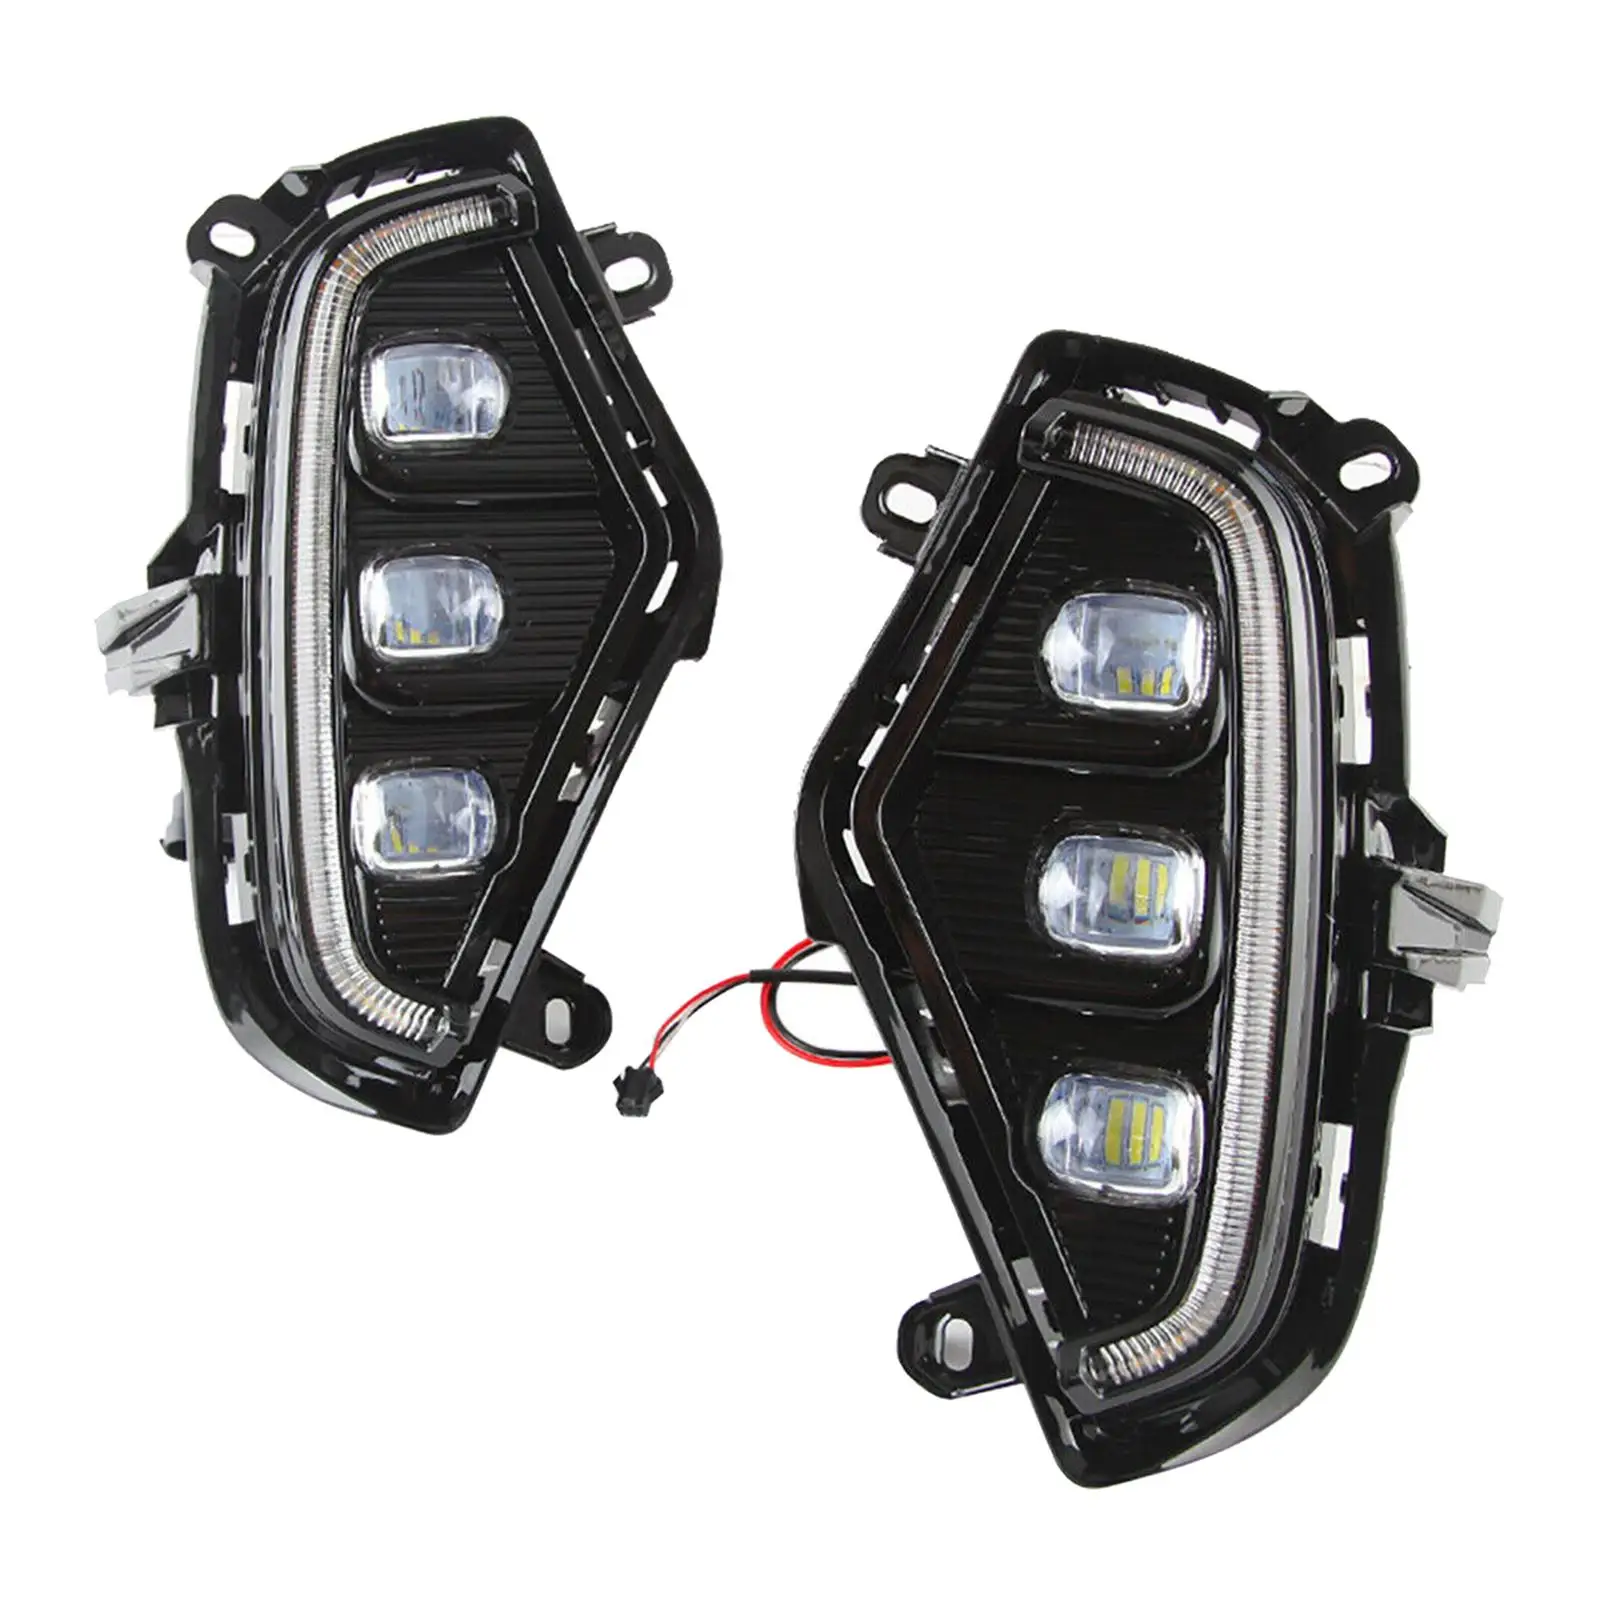 

2 Pieces LED Daytime Running Light W/ Turn Signal Lamps Fog Lights Acrylic Fit for Easy to Install Parts Replace ACC